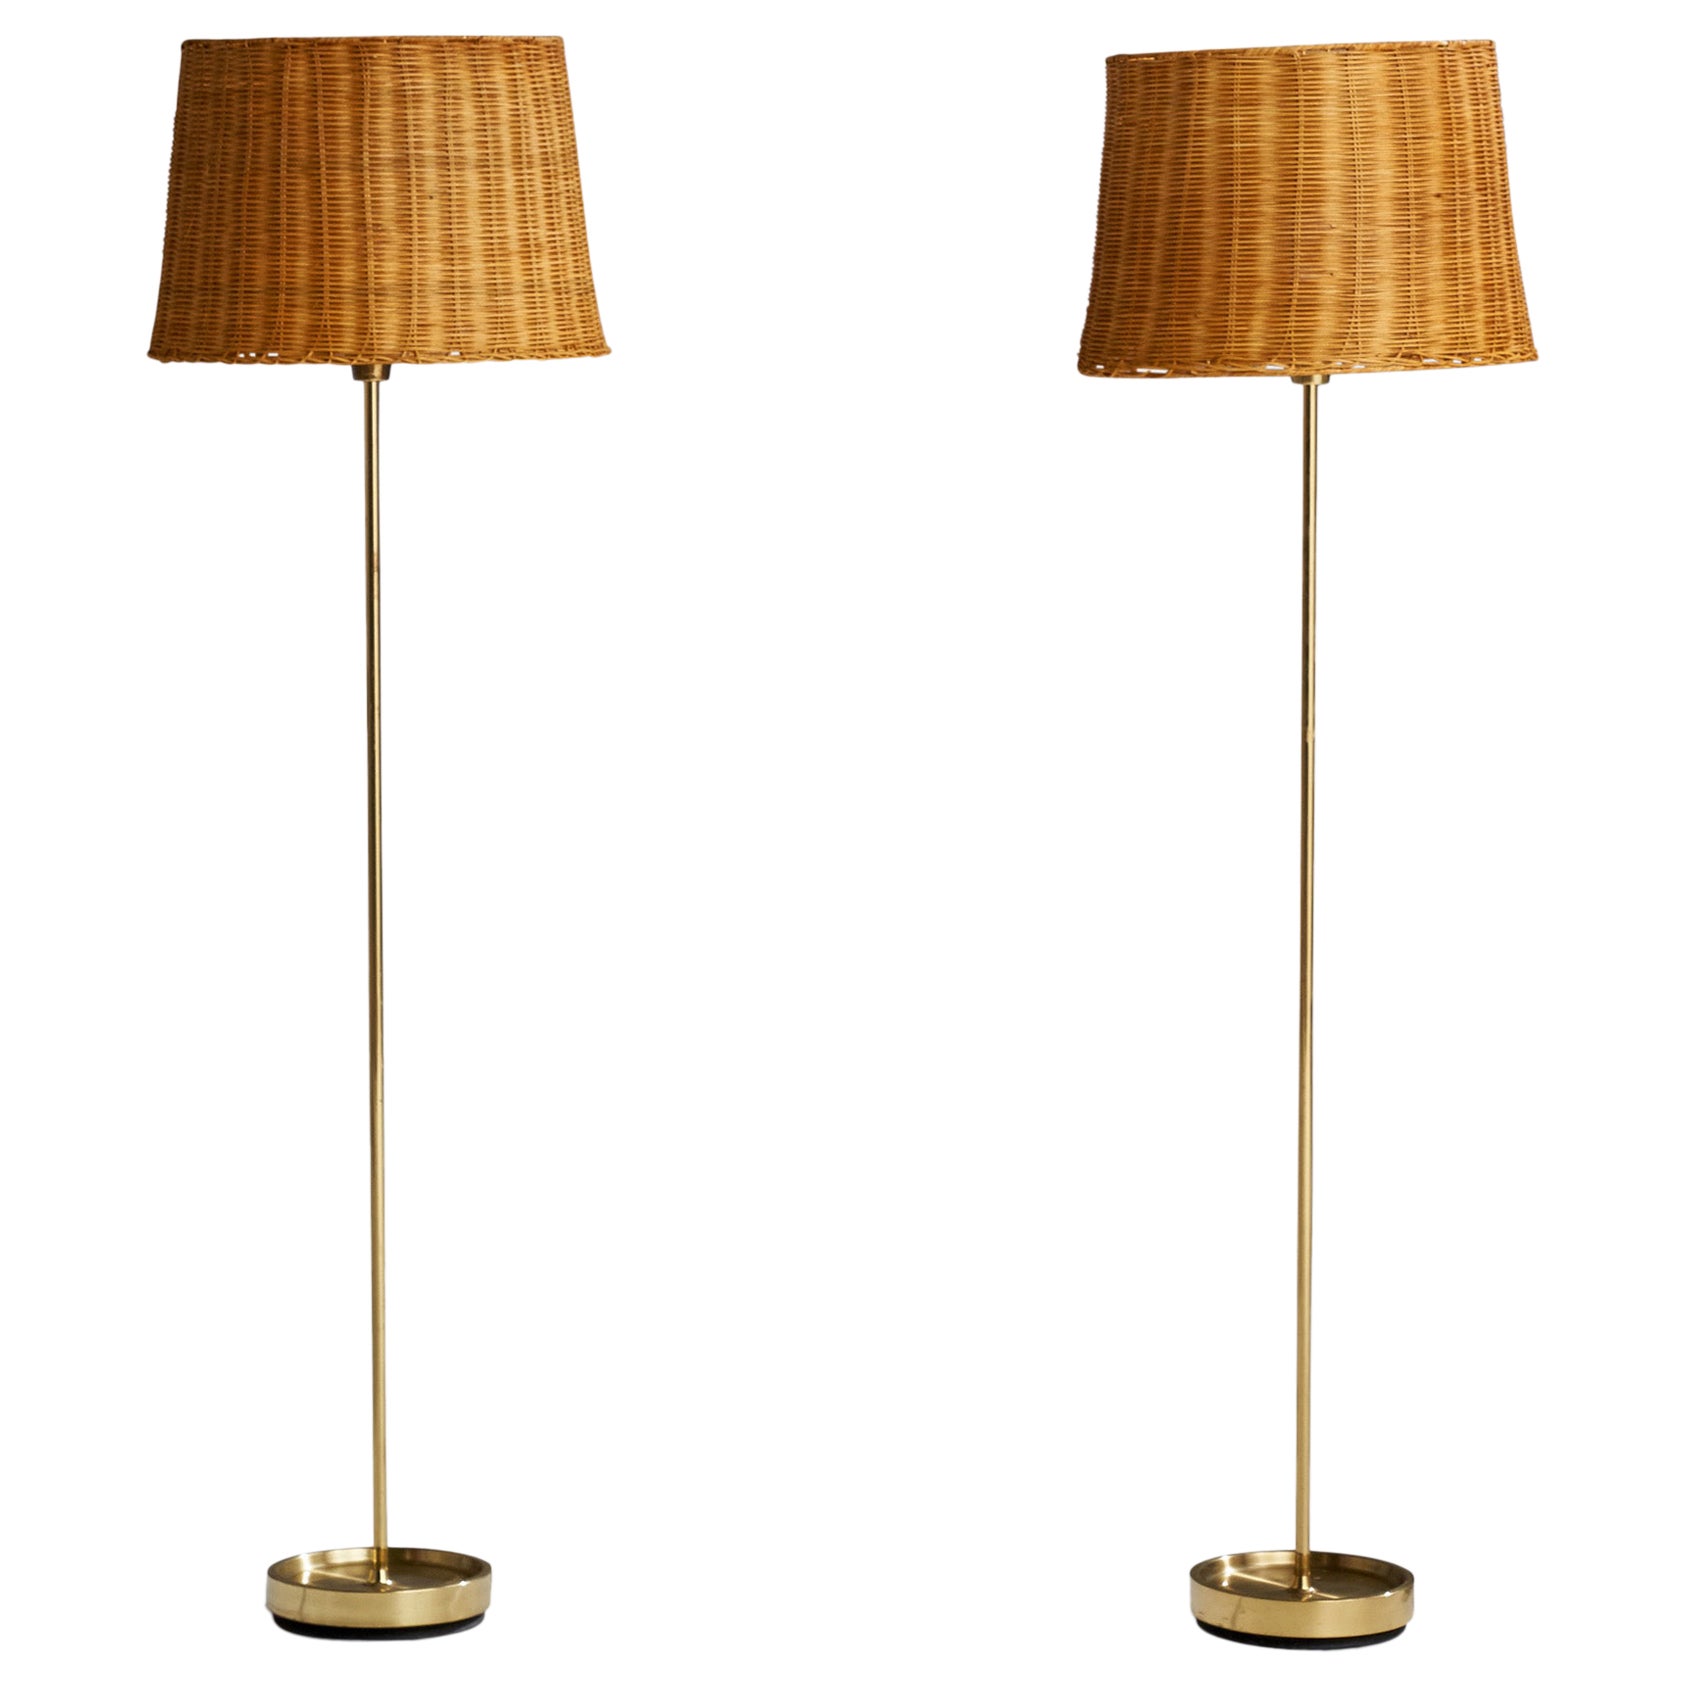 Fagerhults Belysning, Floor Lamps, Brass, Rattan, Sweden, 1960s For Sale